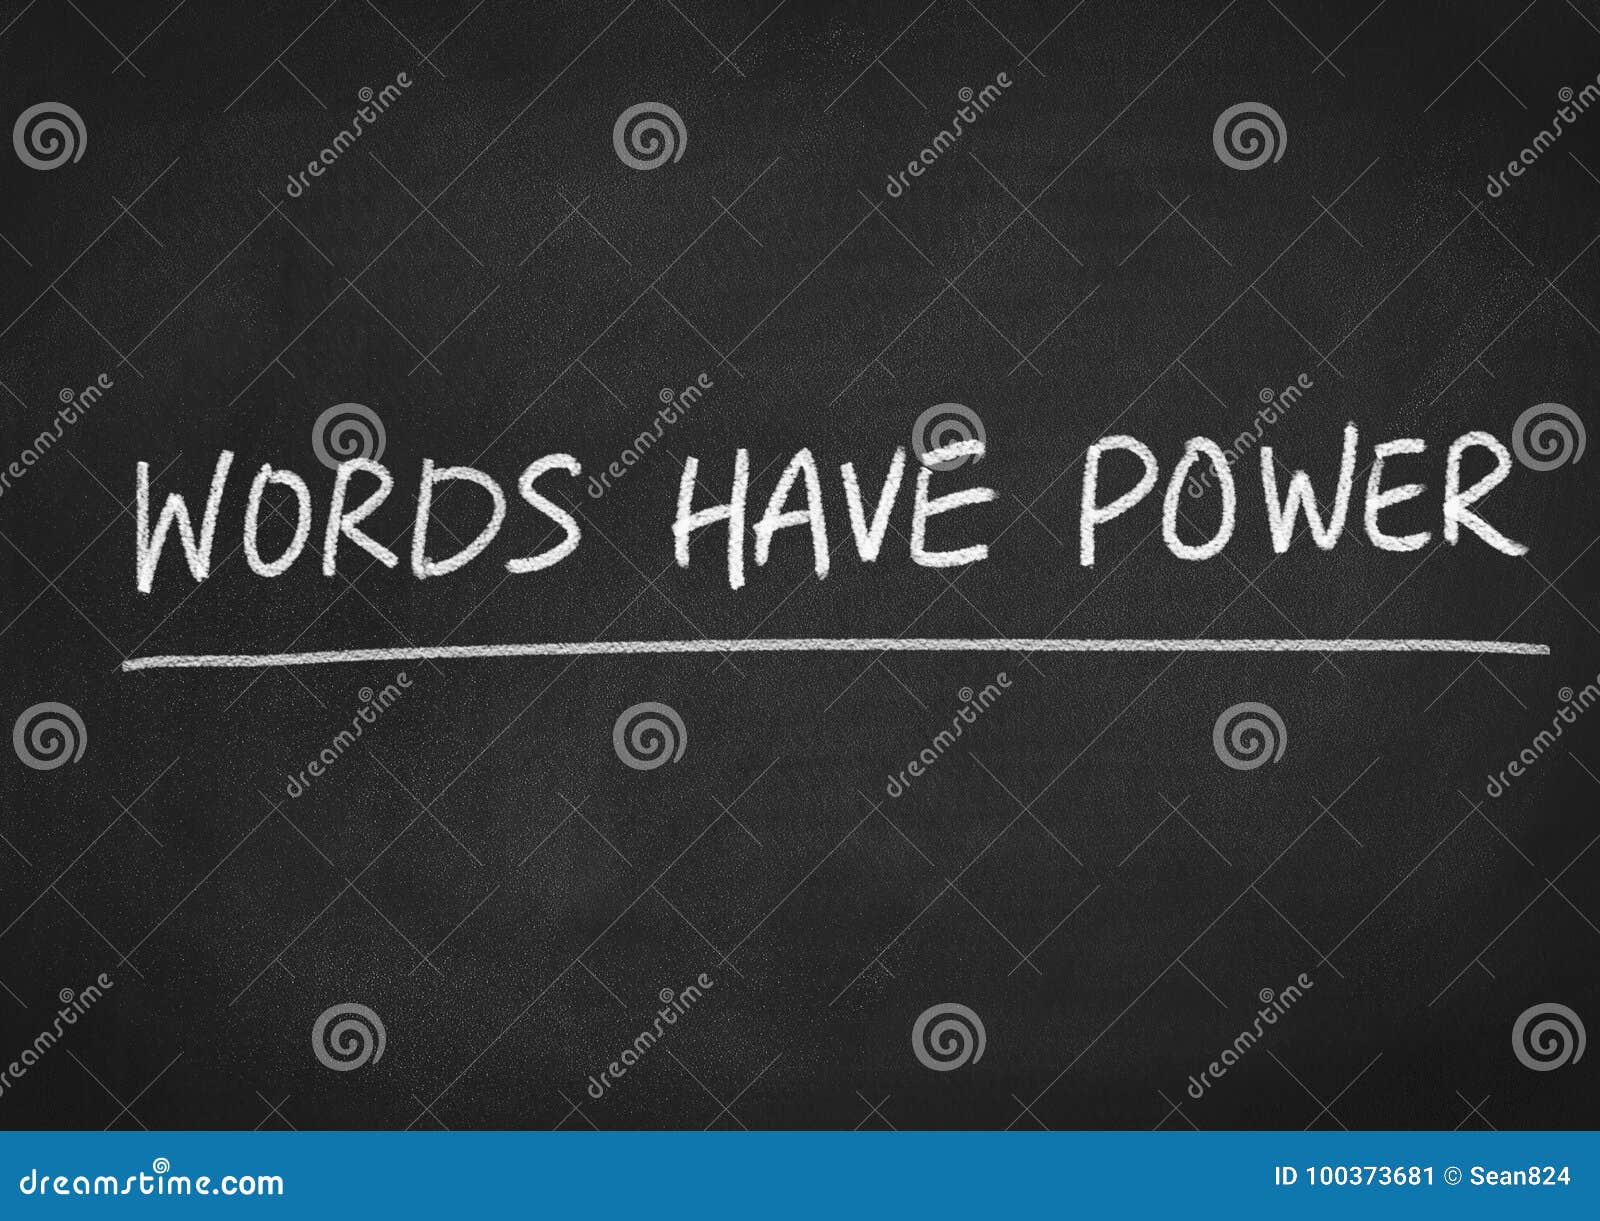 Words Have Power Stock Image Image Of Business Communicate 100373681